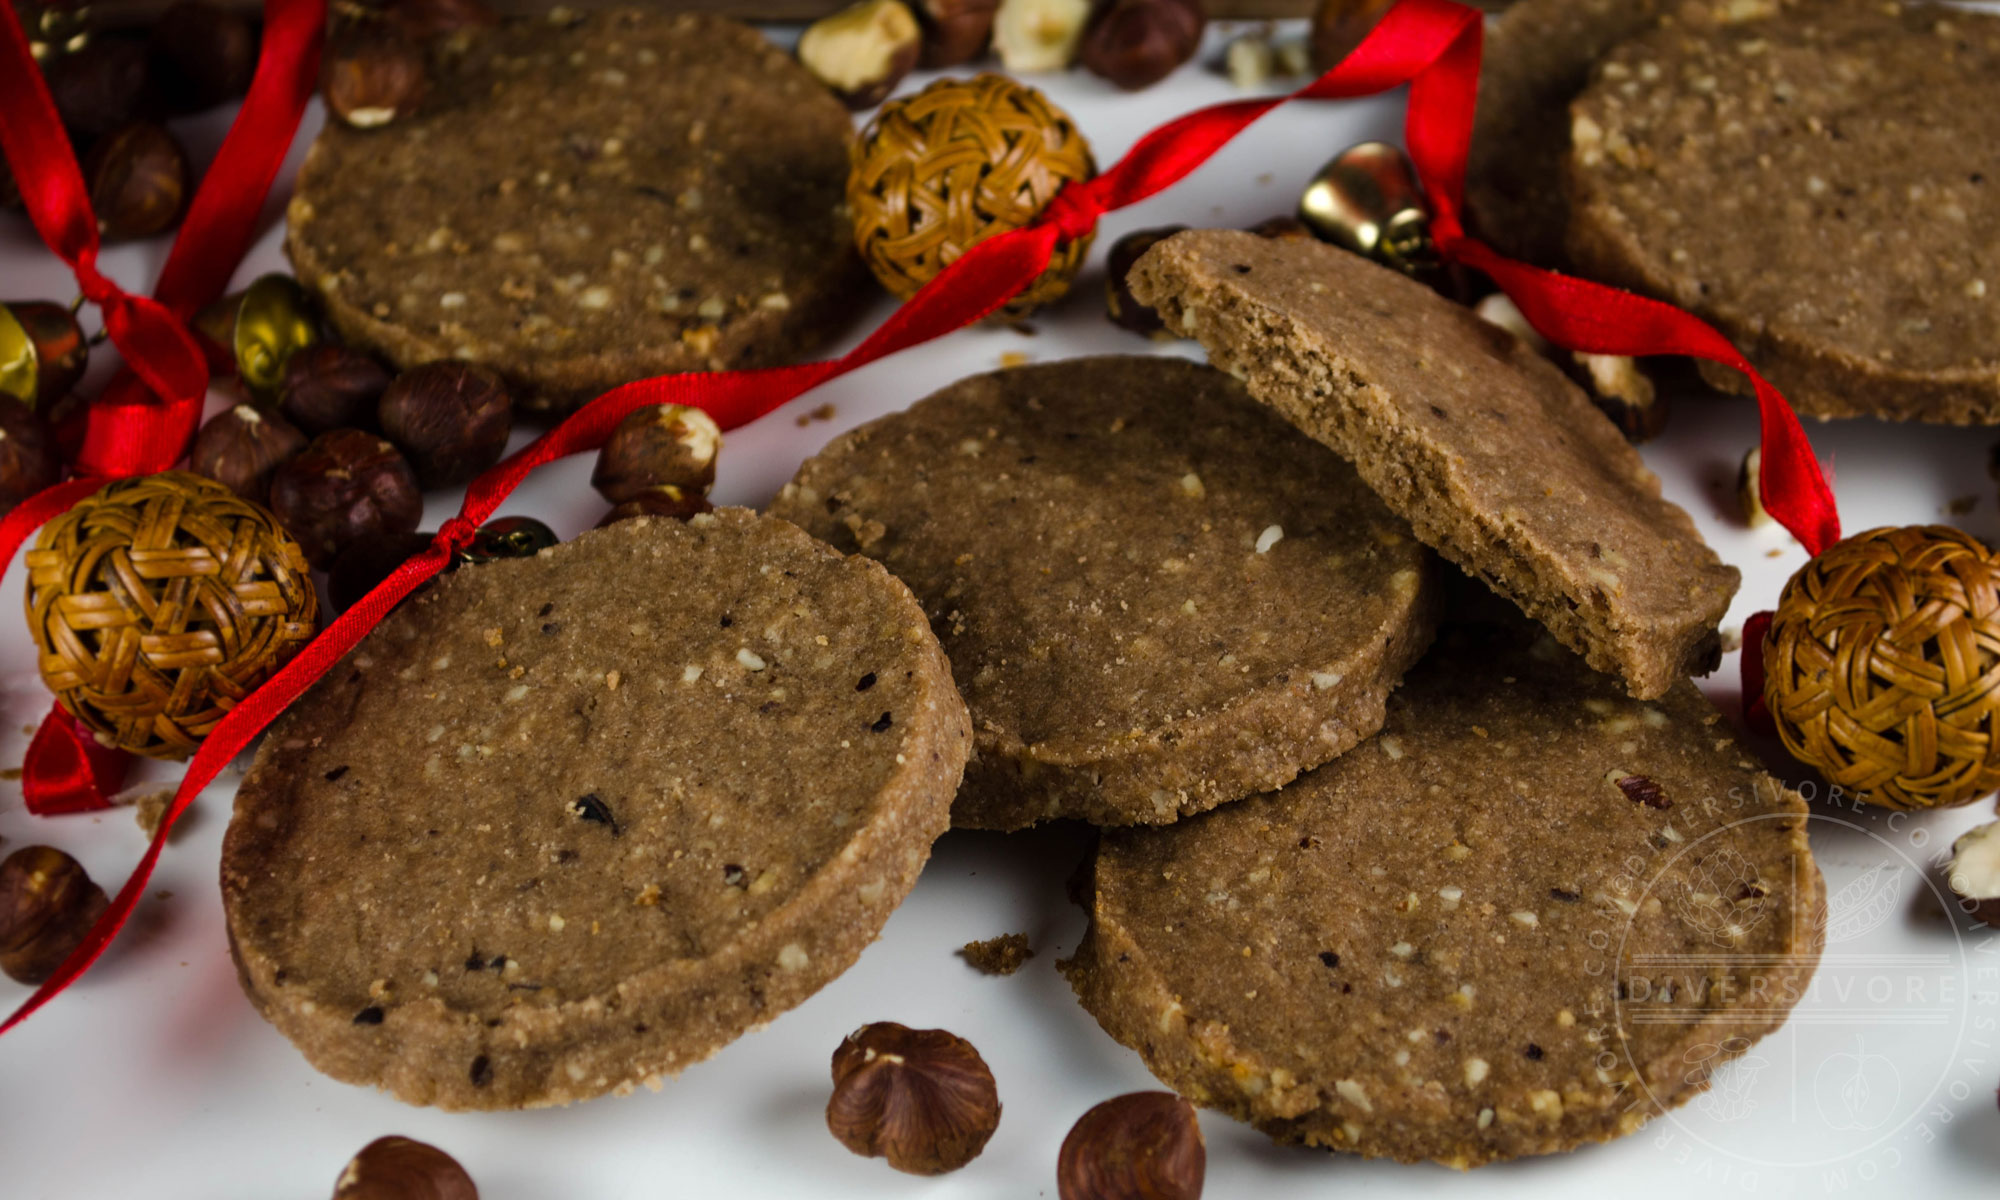 Featured image for “Chocolate Hazelnut Shortbread”